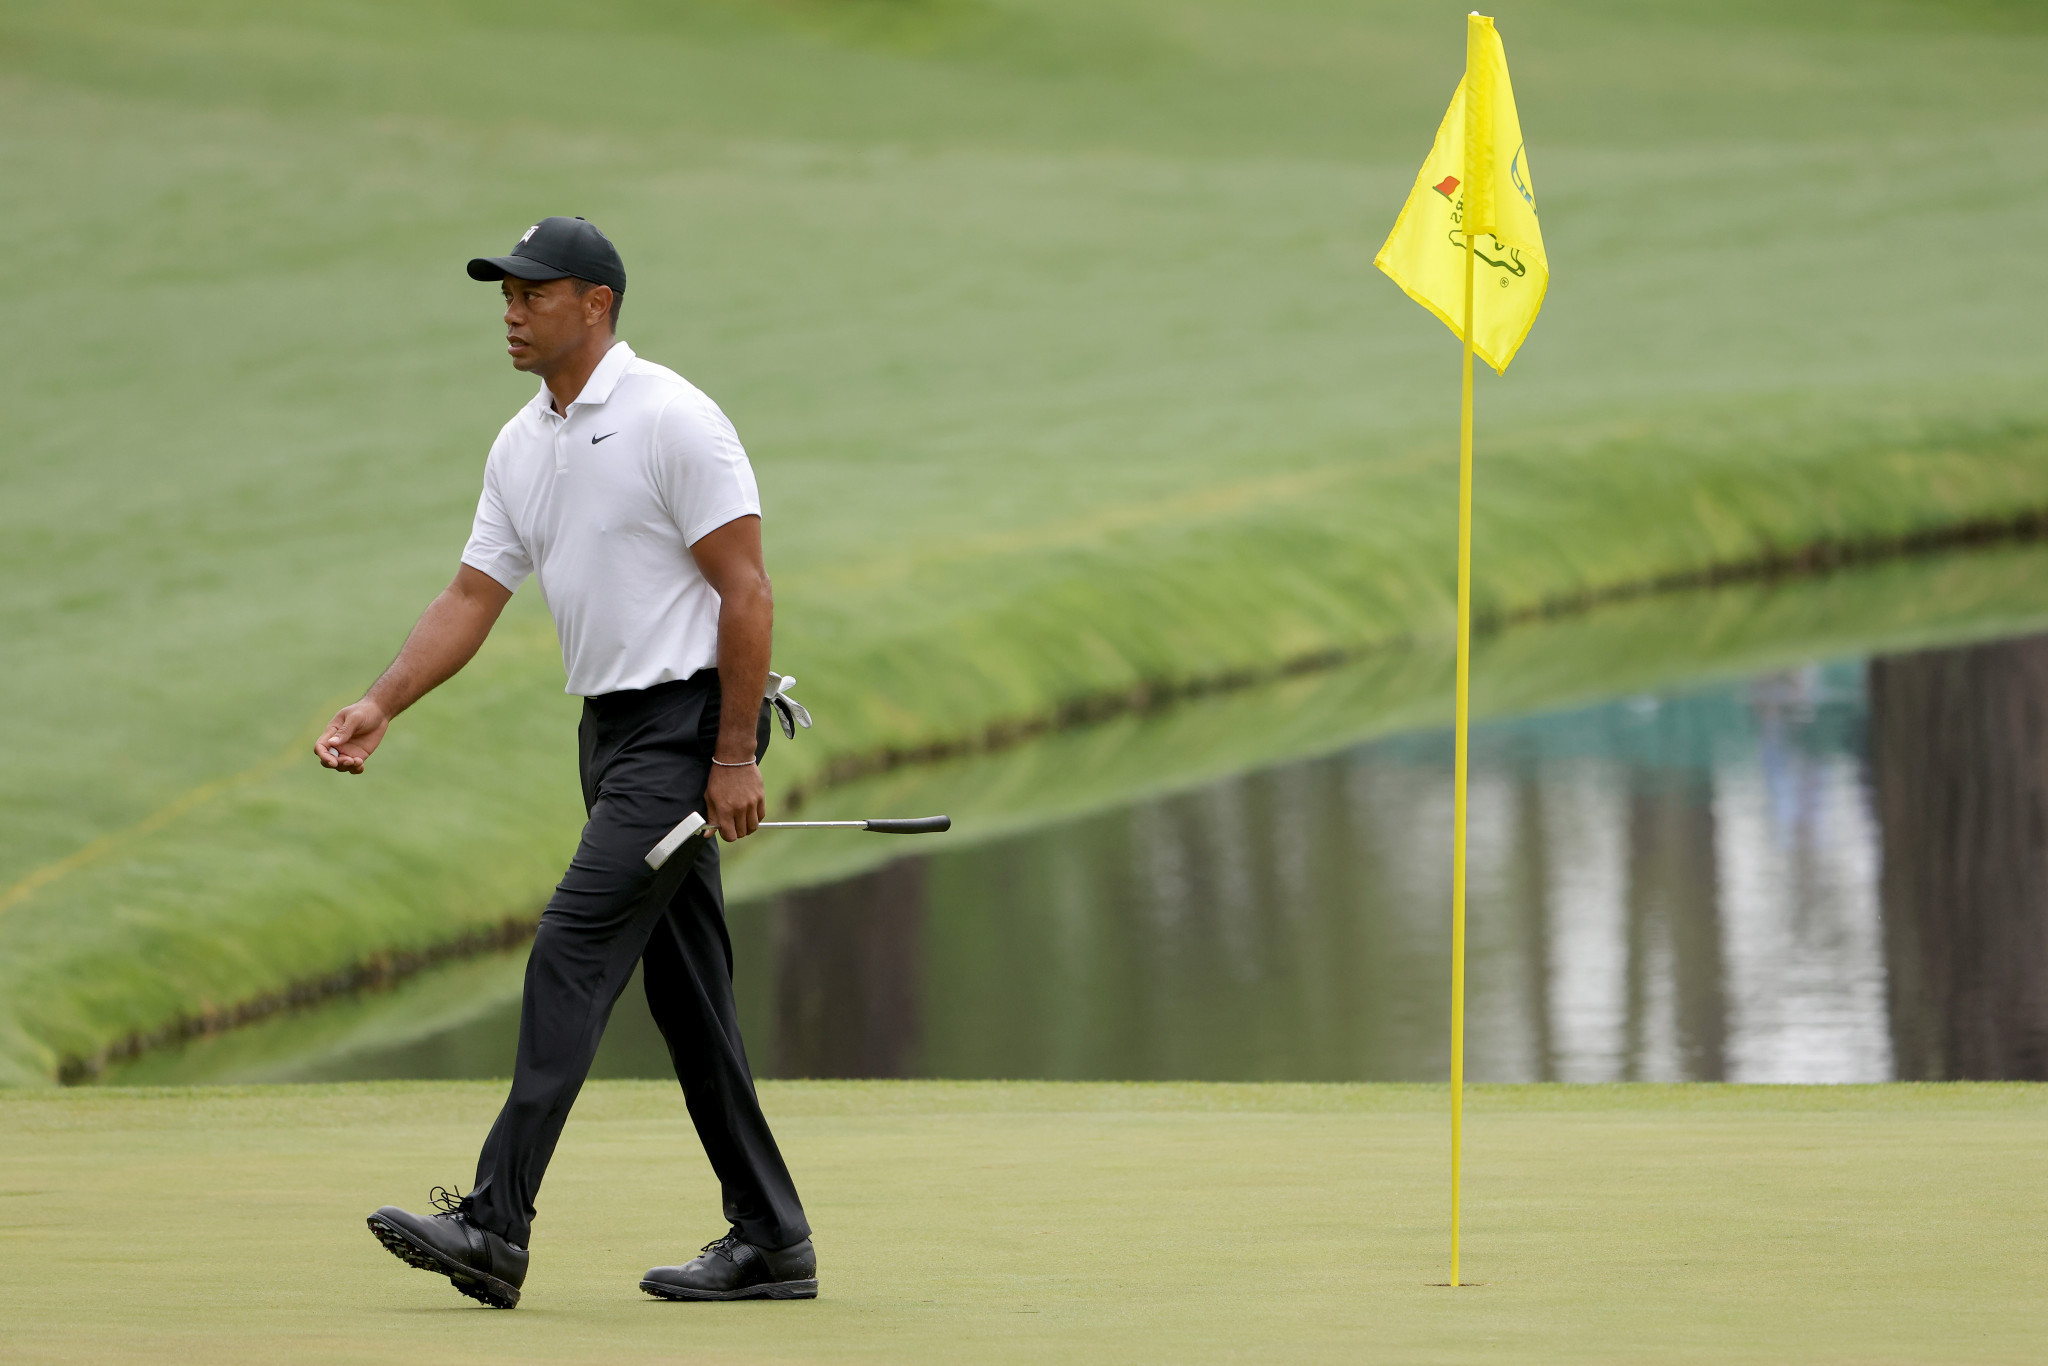 Woods returns to the spotlight at year's opening men's golf major The Masters